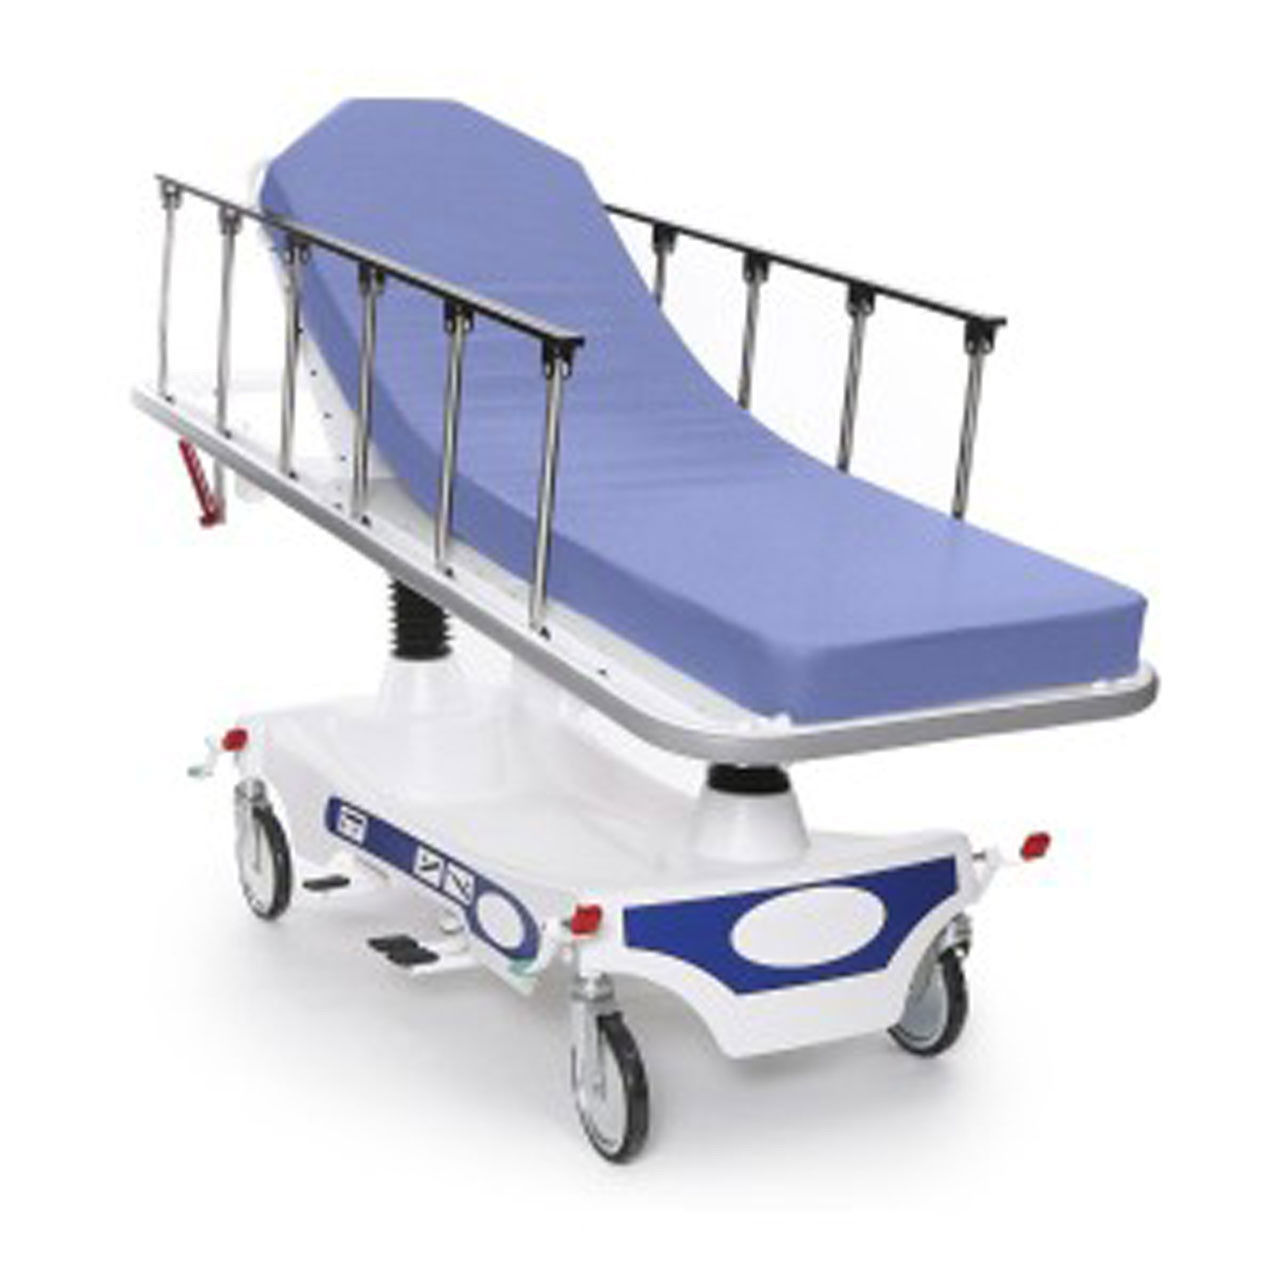 What is the benefit of these wholesale stretcher sheets?